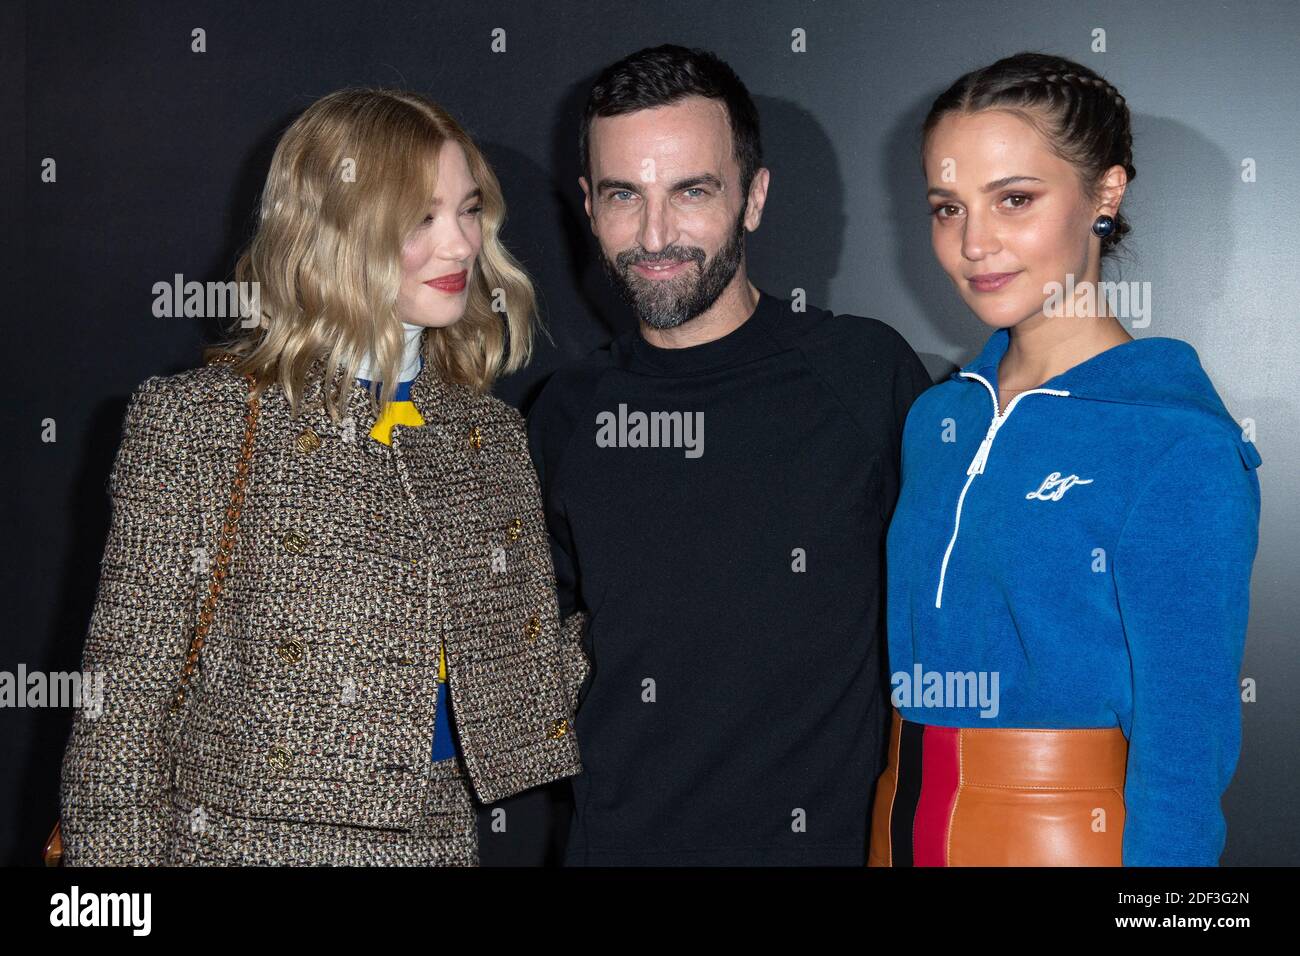 Stylist Nicolas Ghesquiere and Lea Seydoux attending the Louis Vuitton show  during Paris Fashion Week Ready to wear FallWinter 2017-18 on March 07,  2017 at the Louvre museum in Paris, France. Photo